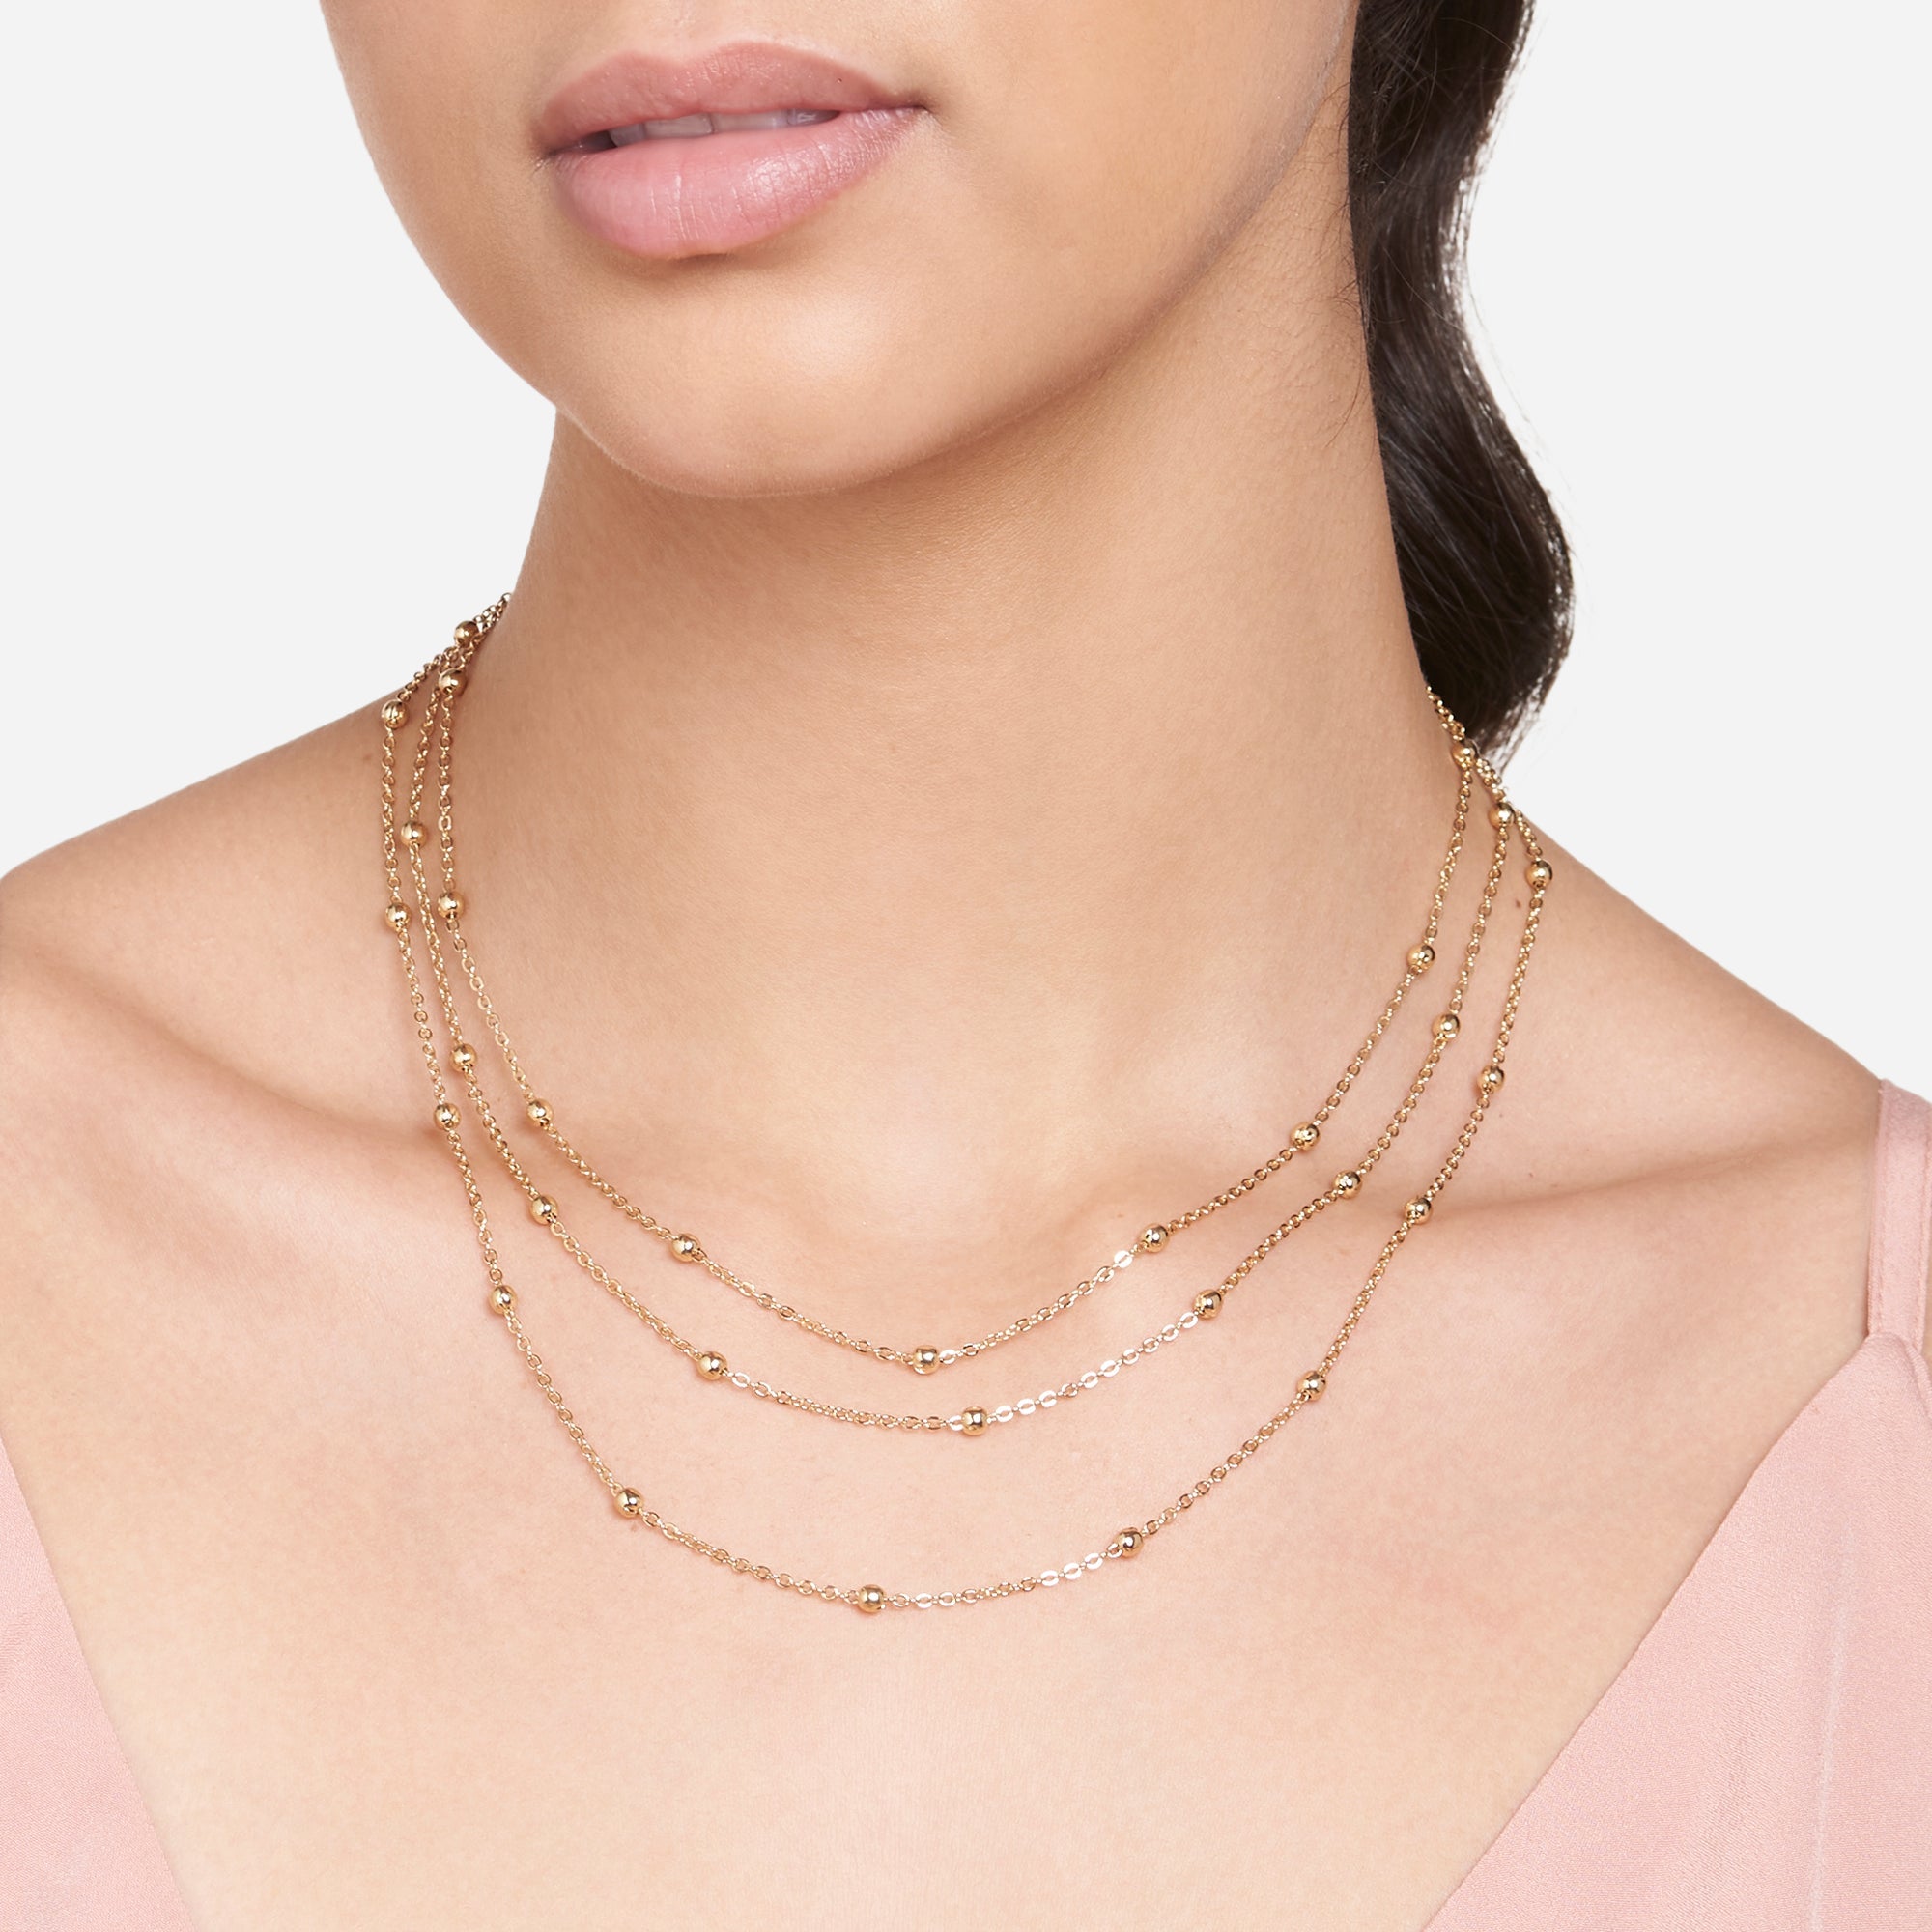 Accessorize London Women's Gold Layered Station Bead Necklace